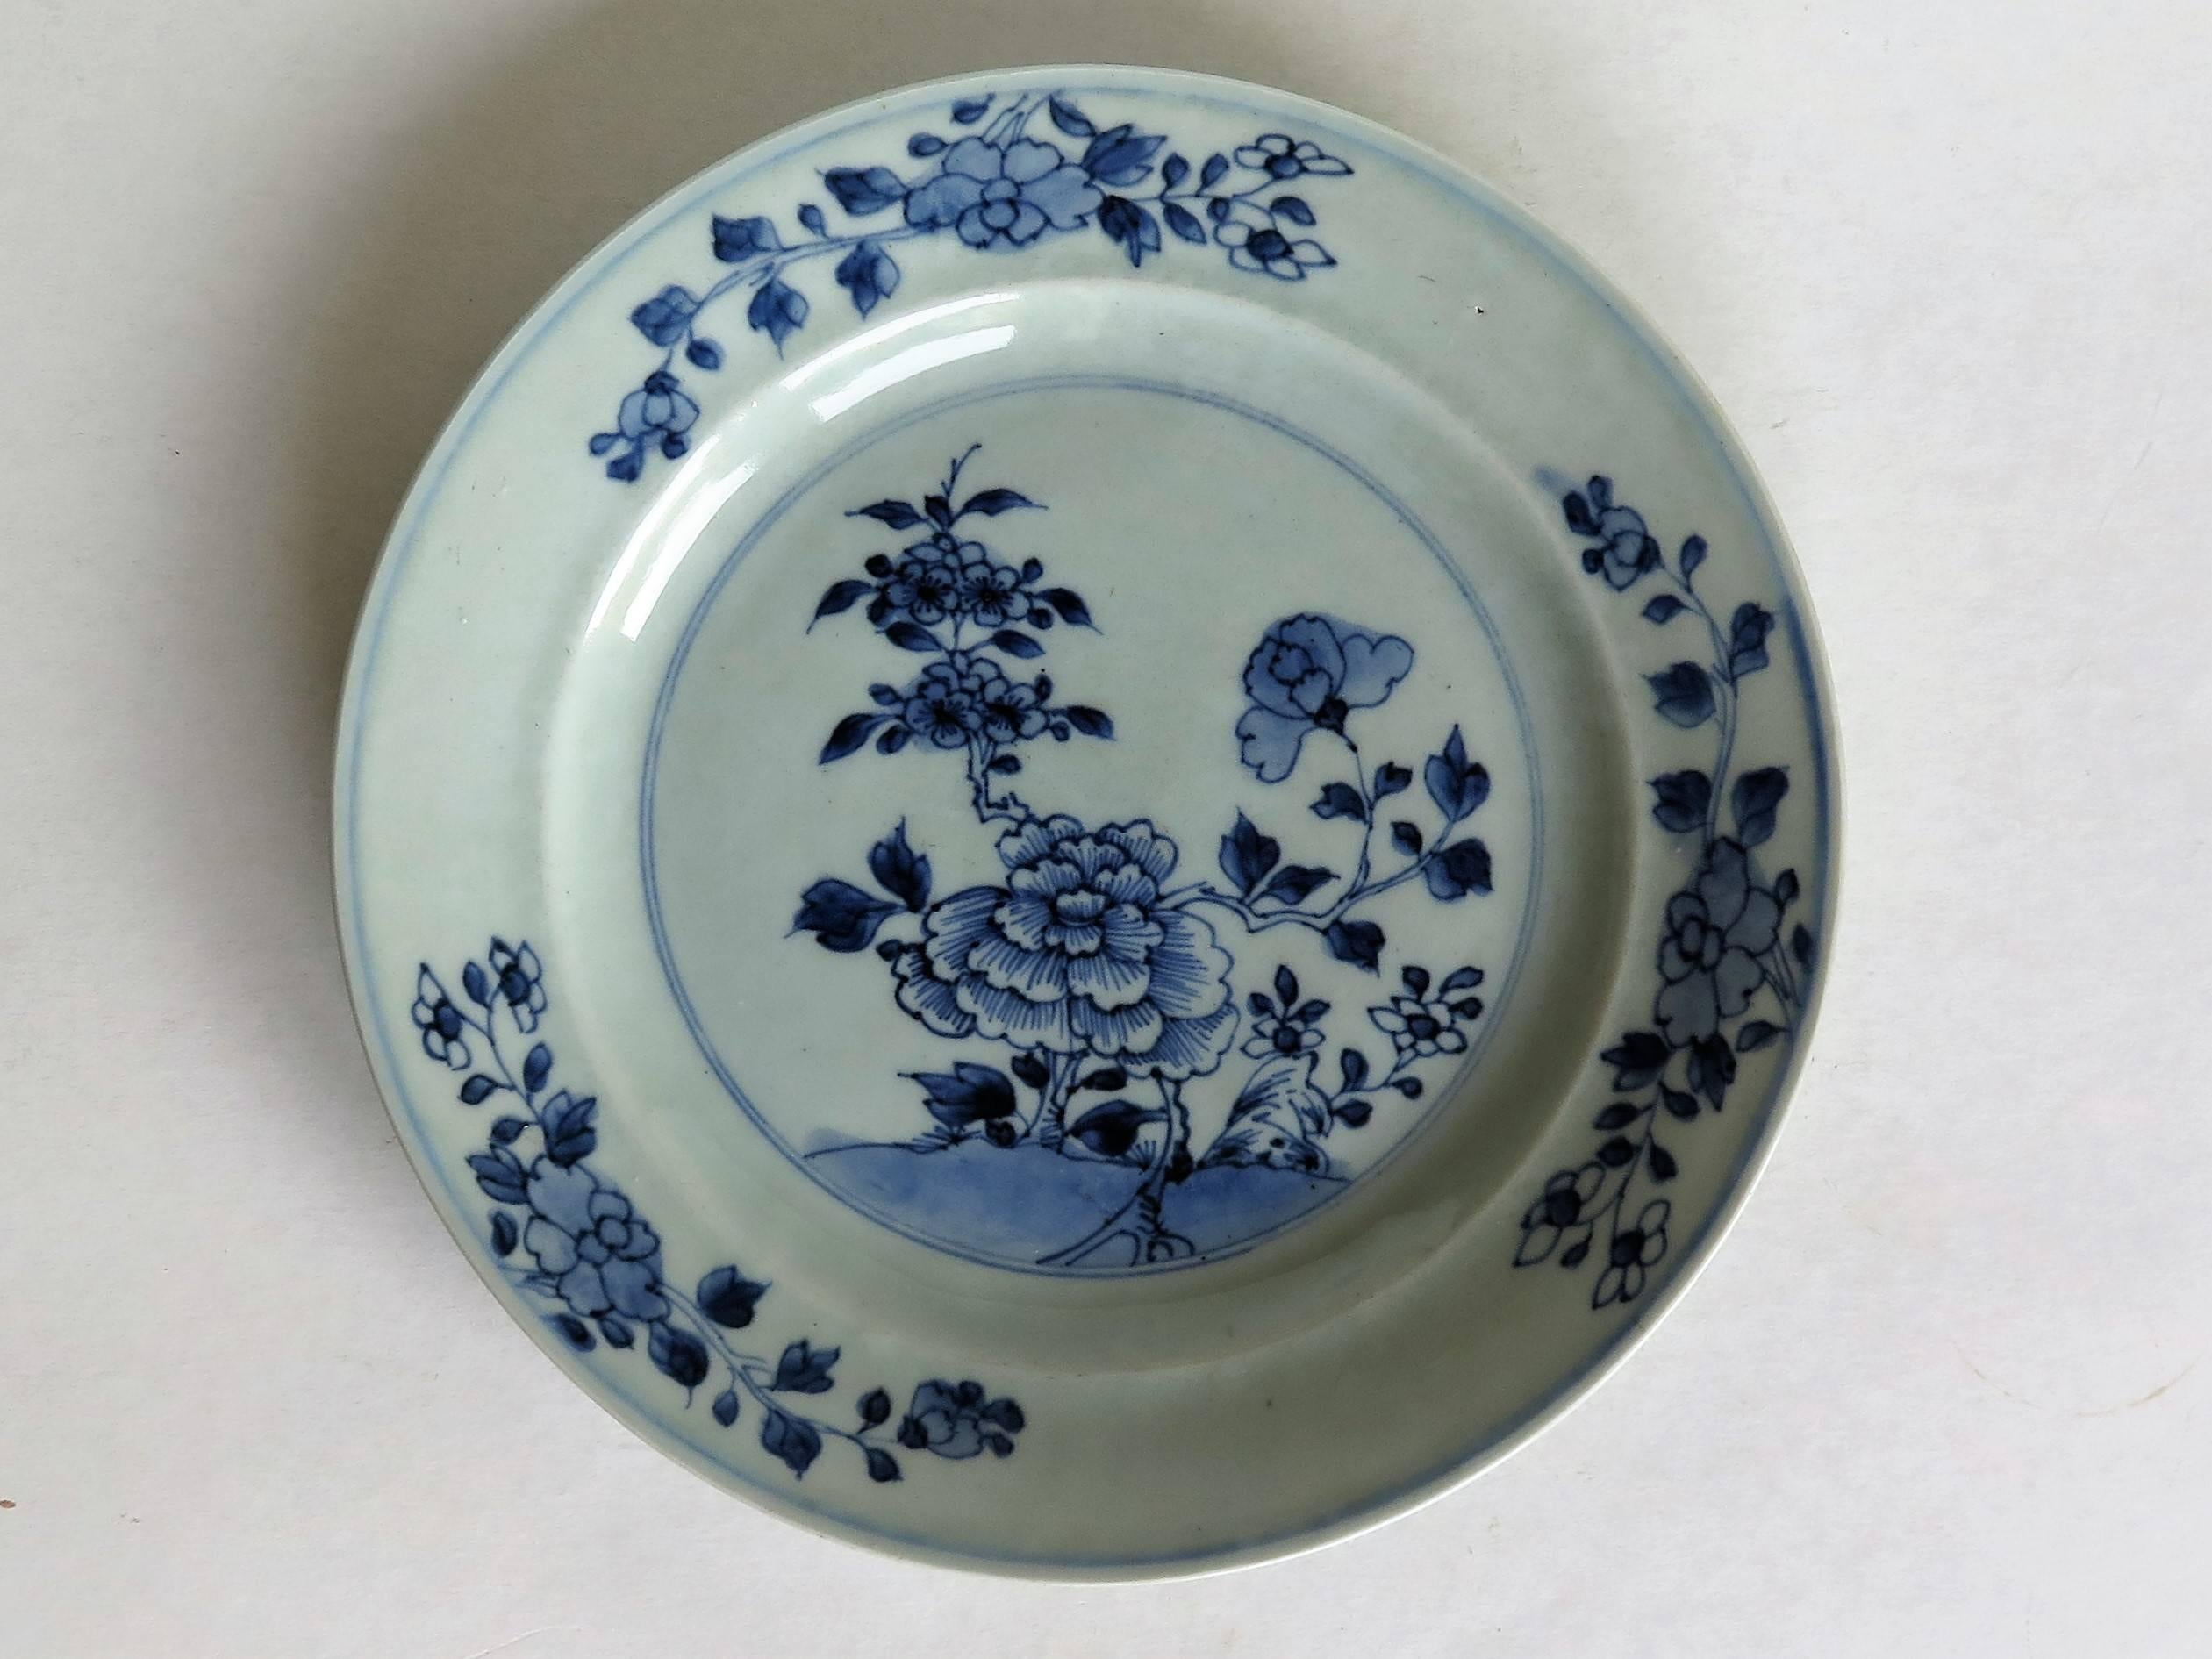 This is a very good Chinese porcelain plate from the Qing dynasty, Qianlong reign, circa 1736-1795.

This plate is finely potted and in excellent condition - which is rare in itself. 

The plate is decorated in varying shades of underglaze blue